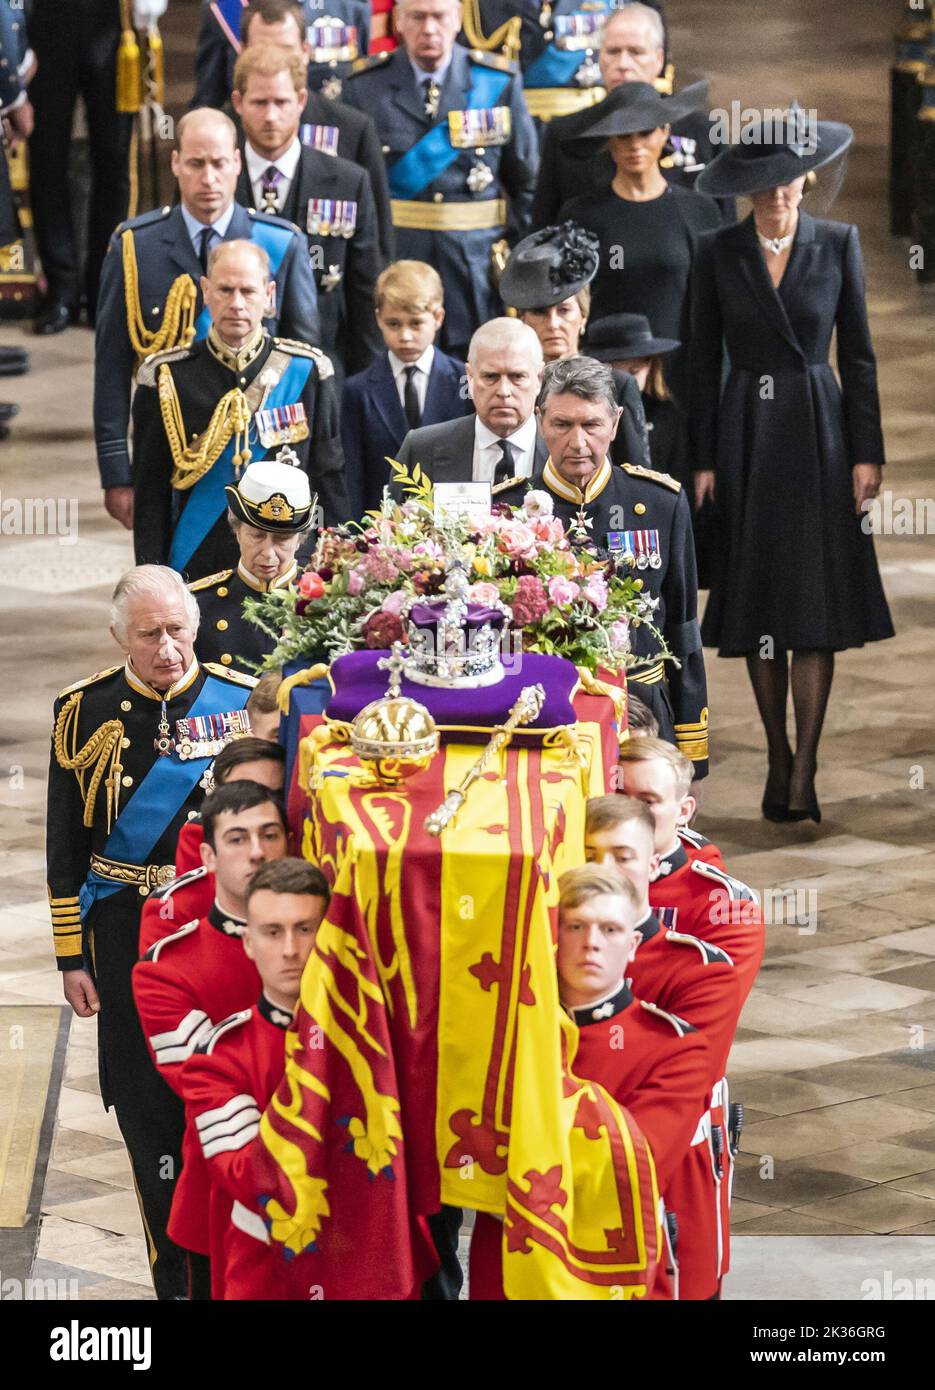 King Charles III, the Queen Consort, the Princess Royal, Vice Admiral Sir Tim Laurence, the Duke of York, the Earl of Wessex, the Countess of Wessex, the Prince and Princess of Wales, Prince George, Princess Charlotte, the Duke and Duchess of Sussex, Peter Phillips (obscured) and the Earl of Snowdon (rear right) follow behind the coffin of Queen Elizabeth II, draped in the Royal Standard with the Imperial State Crown and the Sovereign's orb and sceptre, as it is carried out of Westminster Abbey after her State Funeral. Picture date: Monday September 19, 2022. See PA story FUNERAL Queen. Photo  Stock Photo